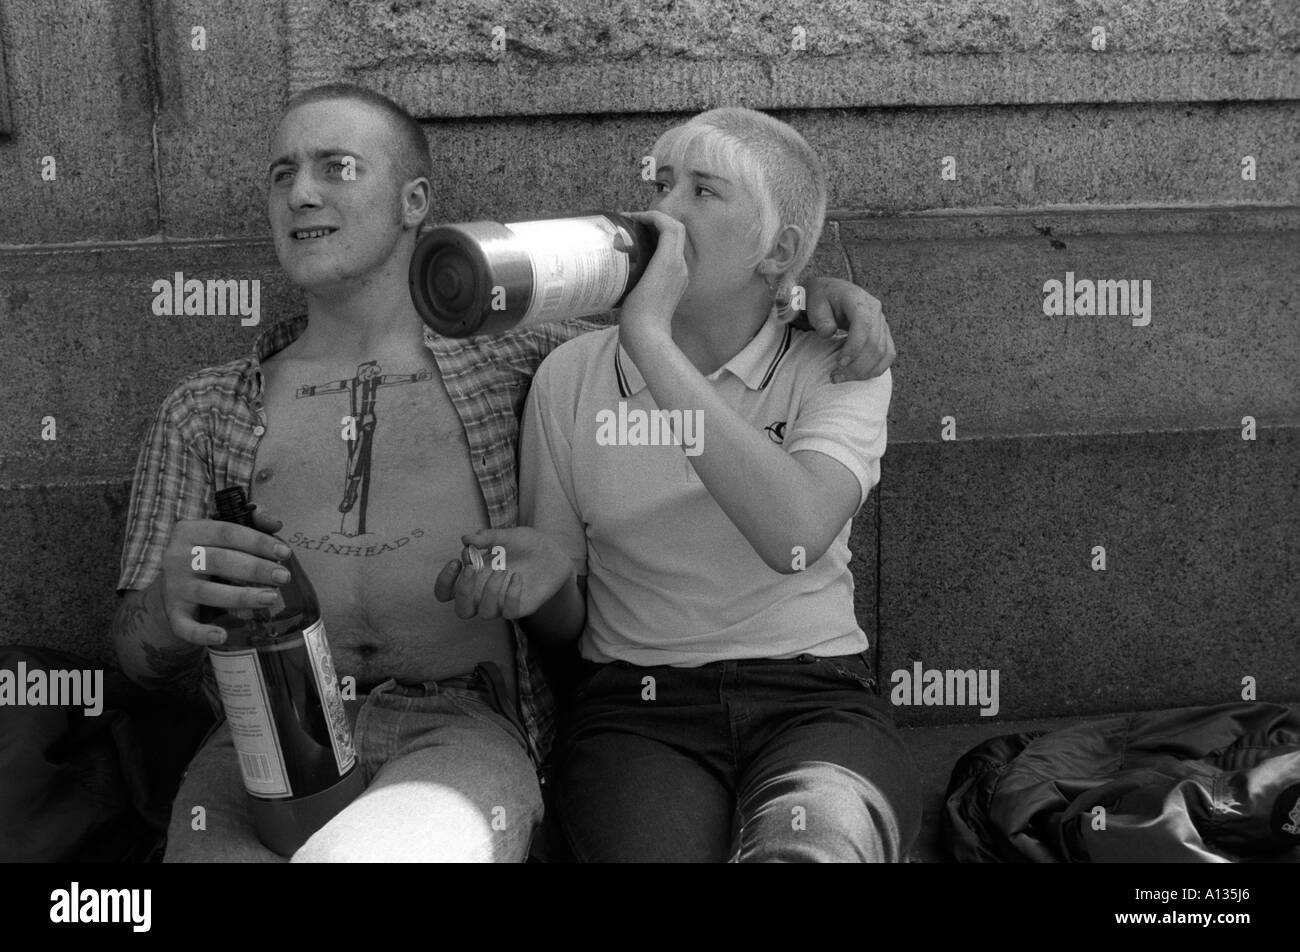 Skinheads a couple drinking alcohol from a bottle the man has a tattoo of Christ as a Skinhead crucified on his chest London UK 1982 HOMER SYKES Stock Photo